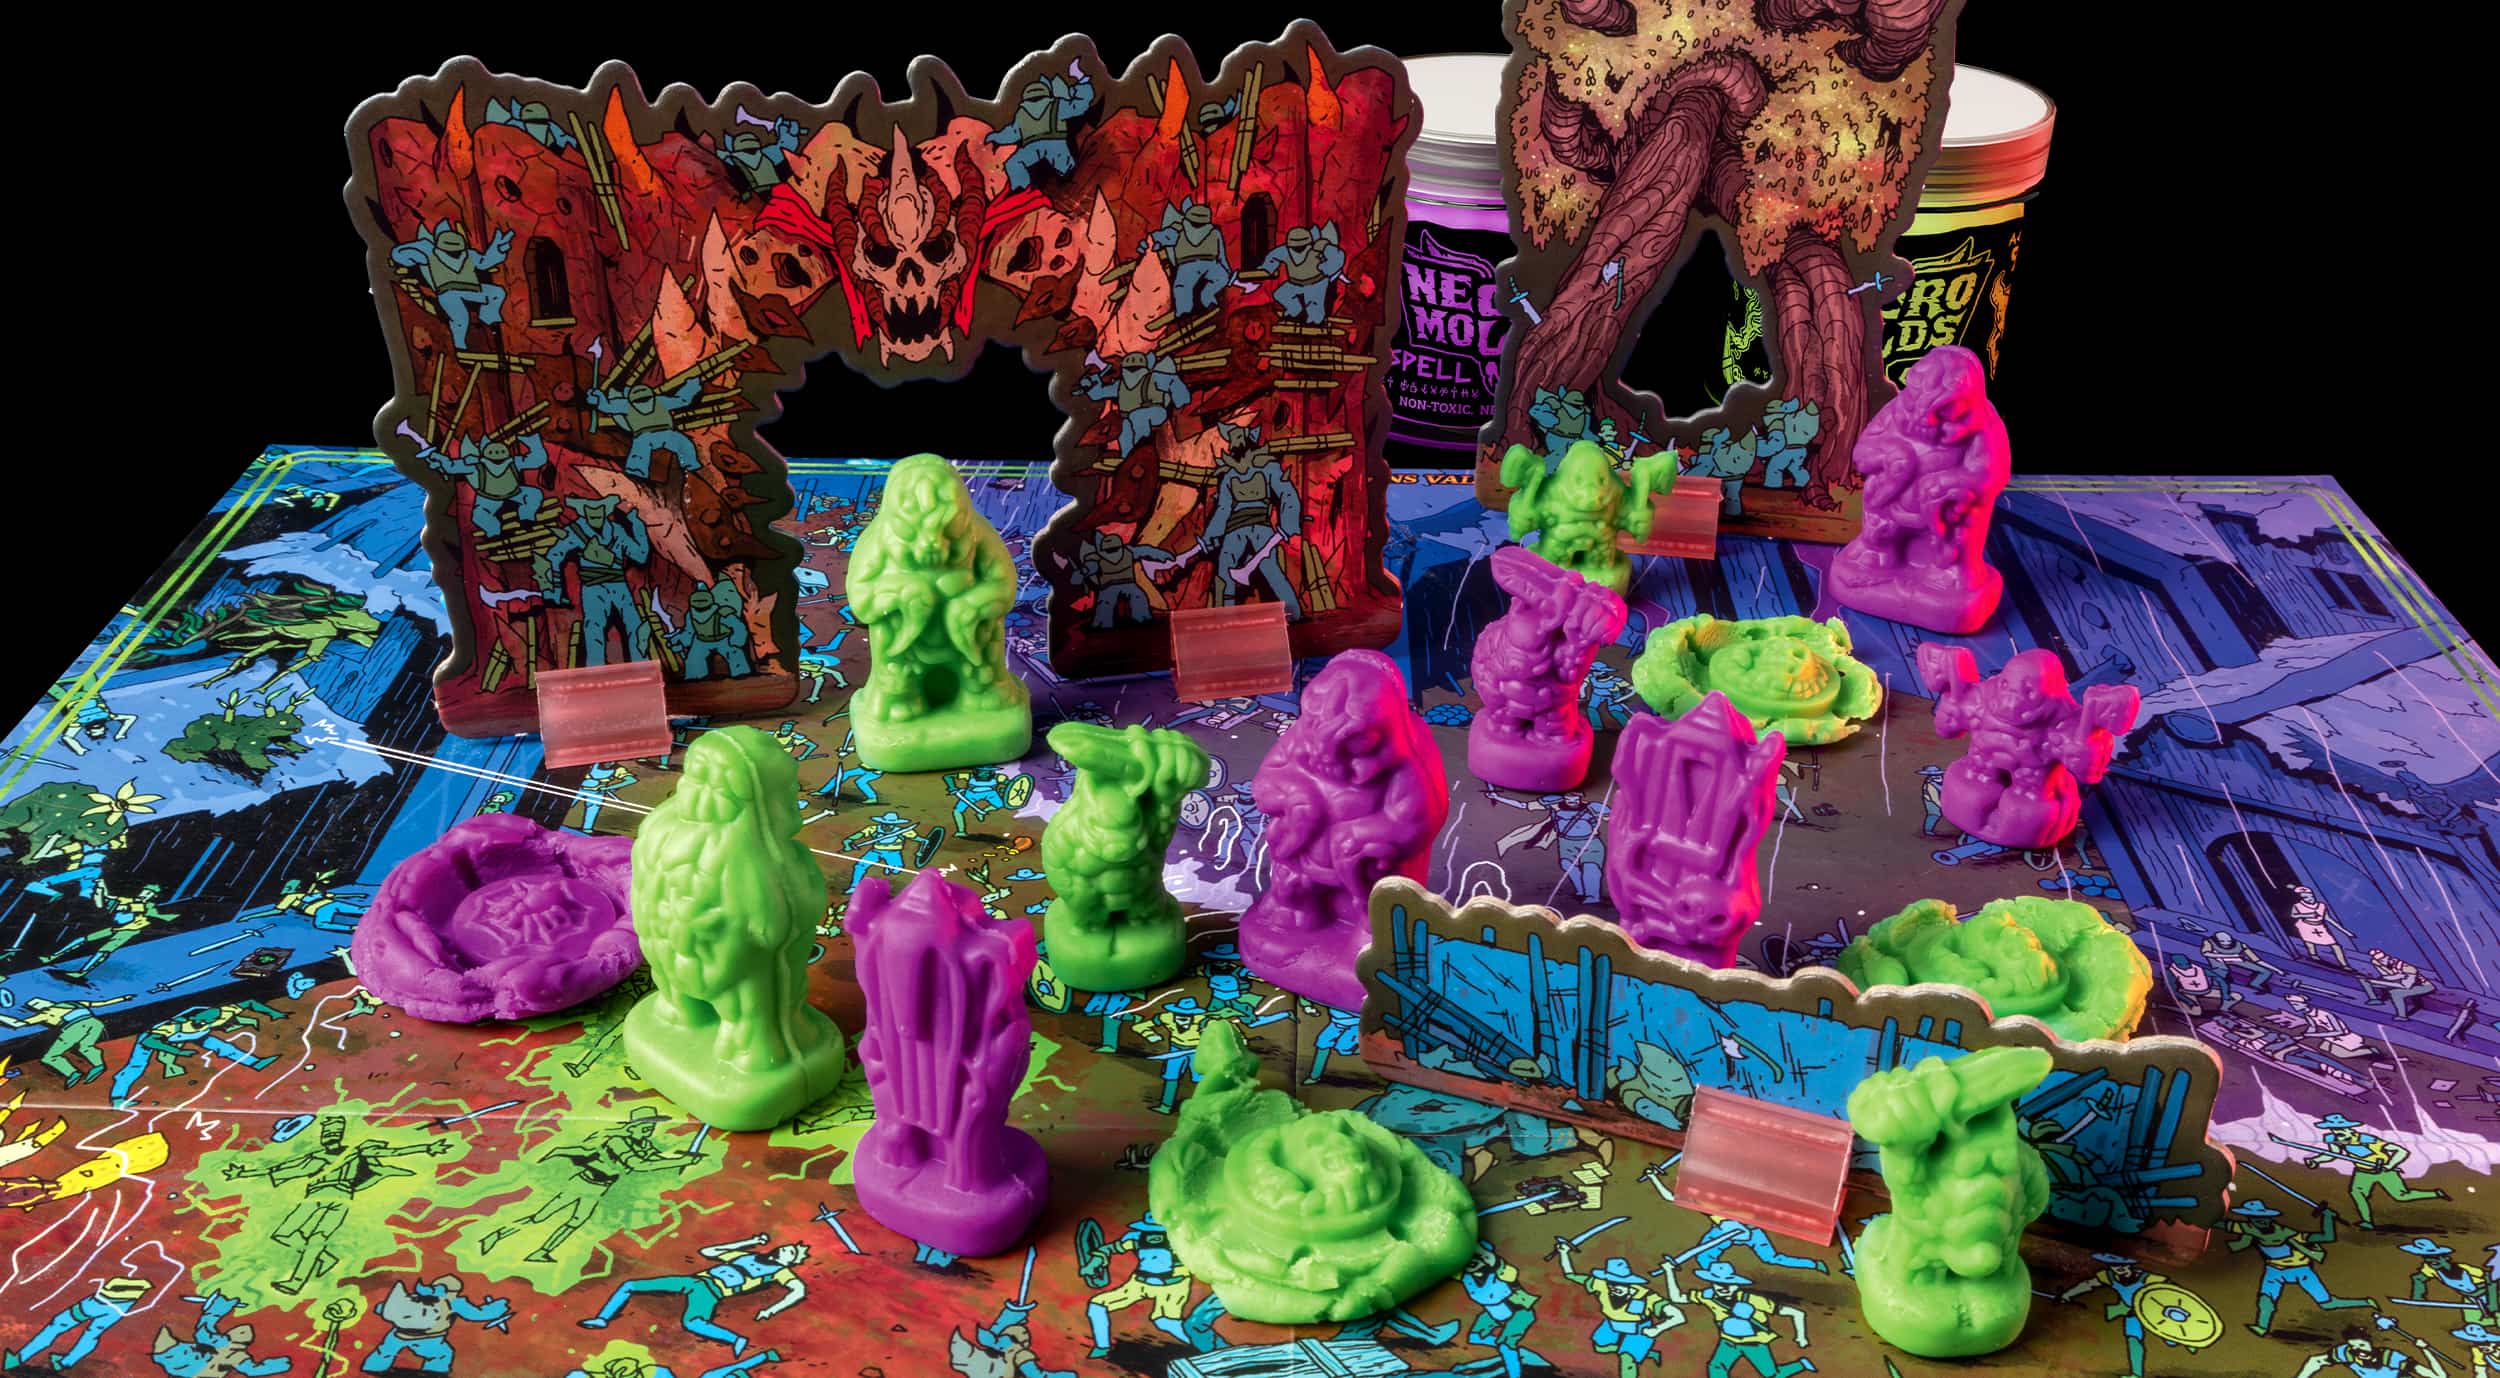 Play doh like clay miniatures being used in the two player family fun board game Necromolds. Some of the play doh monsters have been squished on the game board.